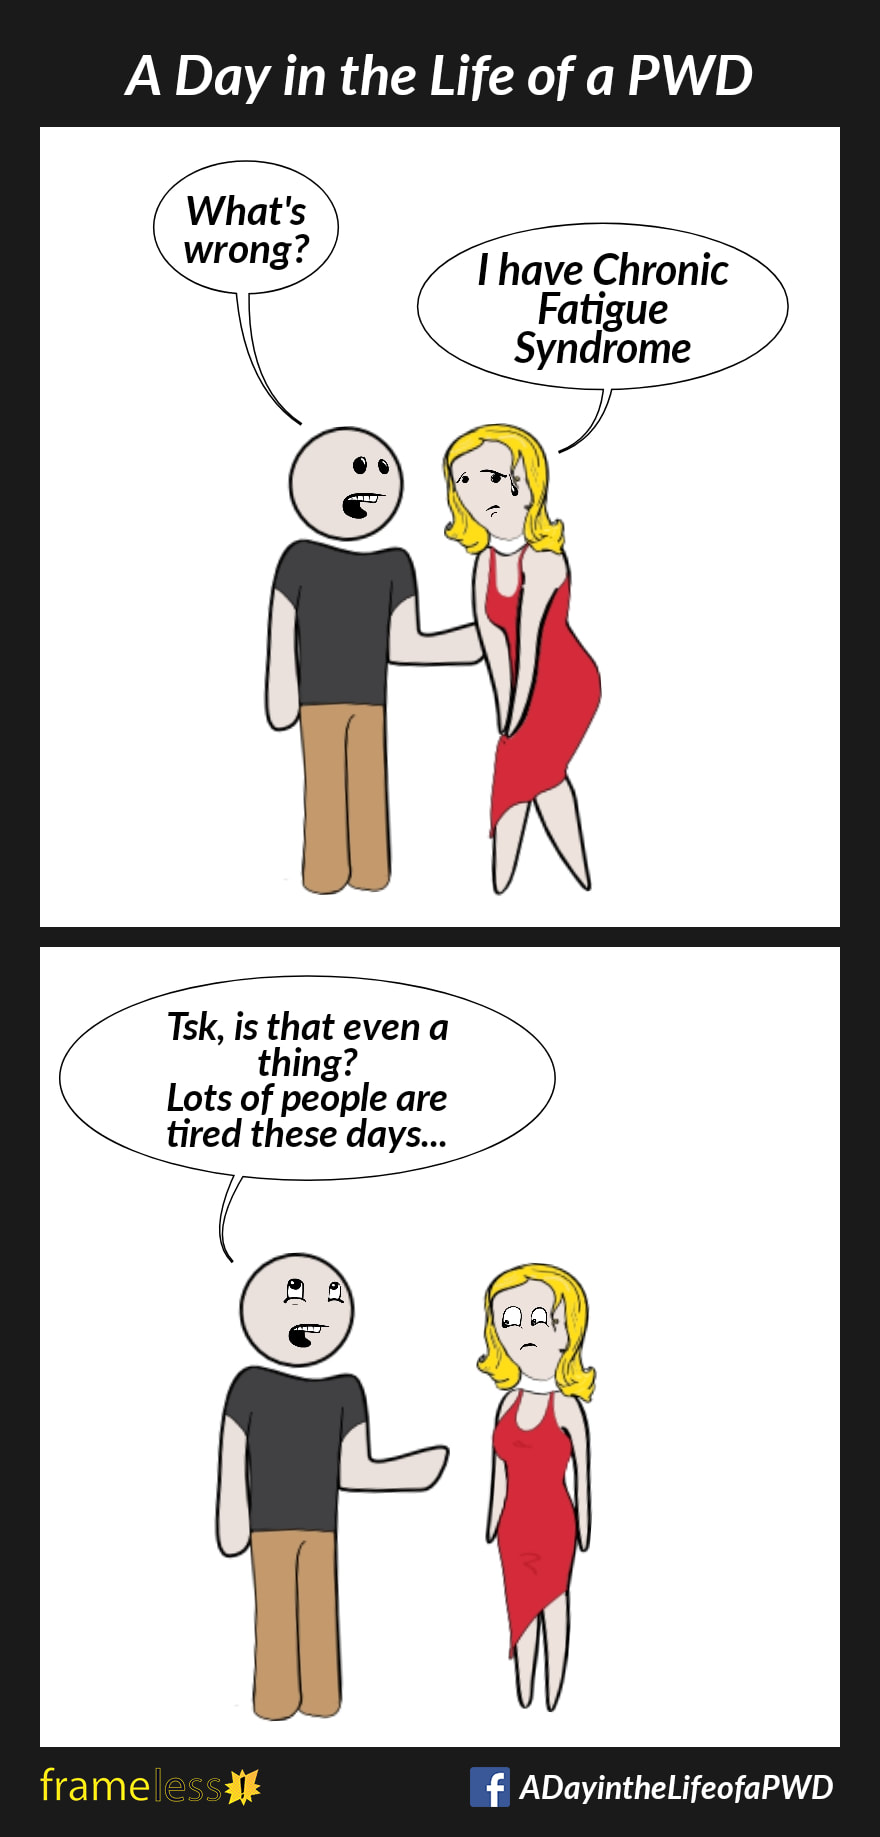 COMIC STRIP 
A Day in the Life of a PWD 

Frame 1:
A woman and man together. The woman is bent over and looking tired.
MAN: What's wrong?
WOMAN: I have Chronic Fatigue Syndrome 

Frame 2:
MAN (rolling his eyes): Tsk, is that even a thing? Lots of people are tired these days...